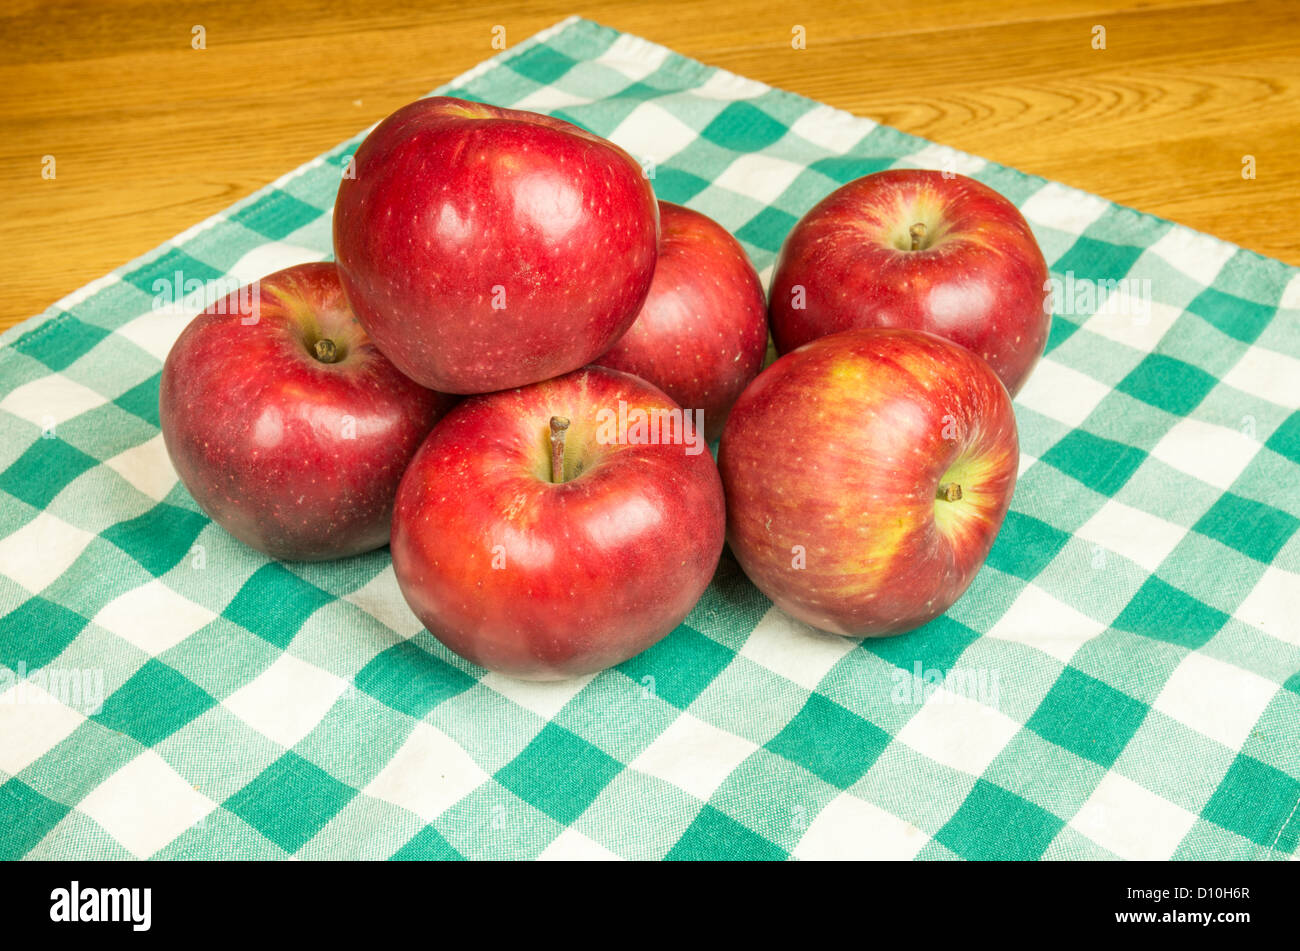 Winesap apples on a checked cloth Stock Photo